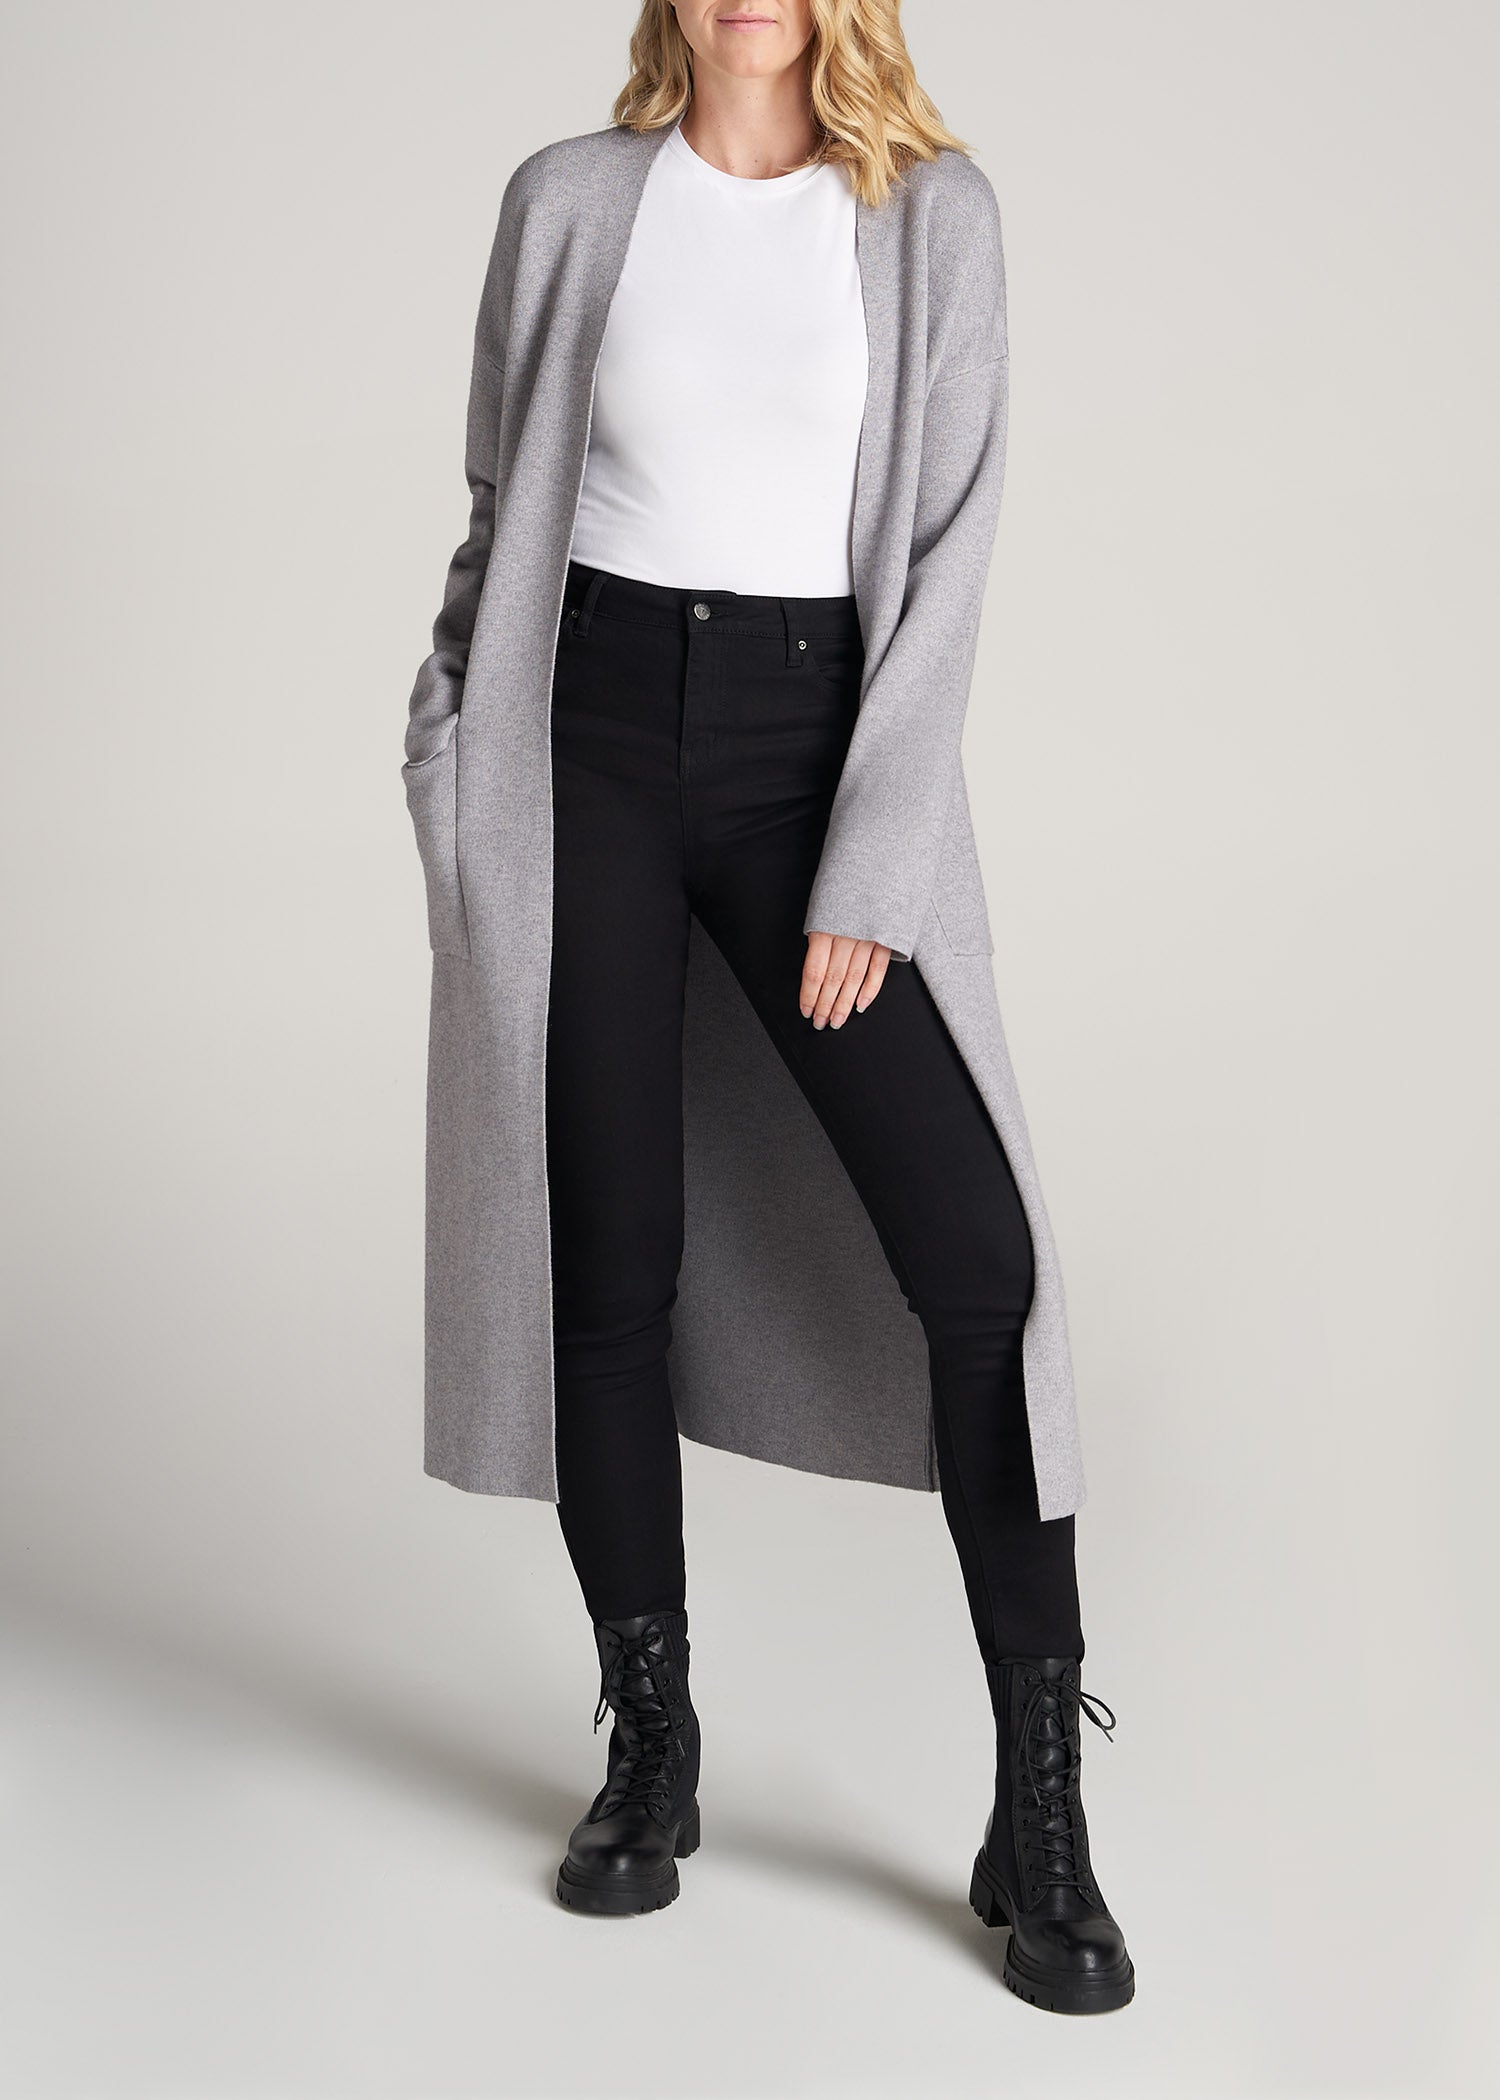 American-Tall-Women-LongBelted-Cardigan-LightGreyMix-front